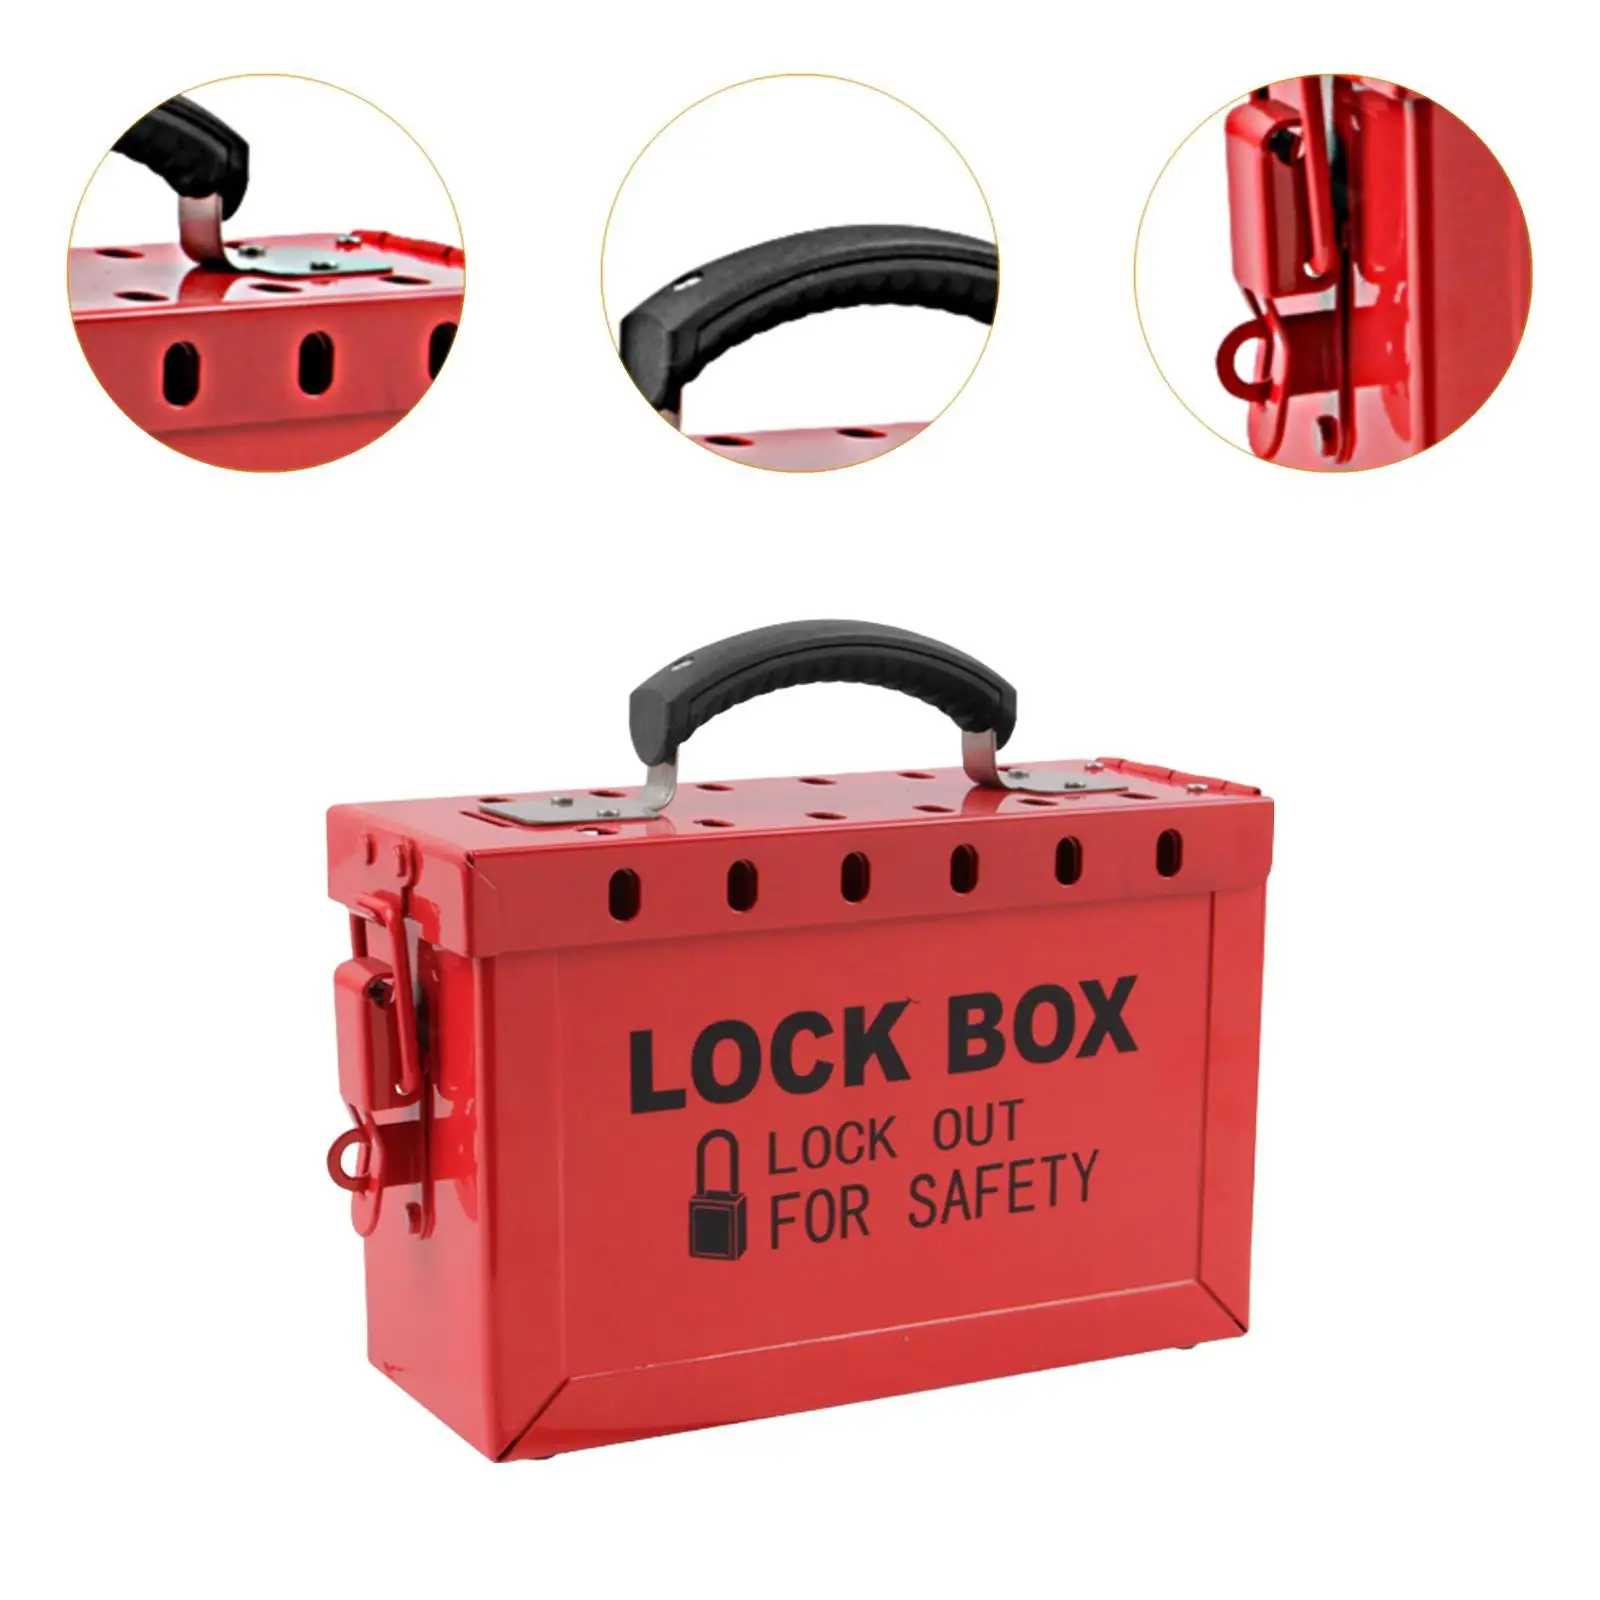 Lock Box 13 Users Anti Slip Handle Lightweight Convenient Efficiency Easy to Use Padlock Box for Car Factory Device Management